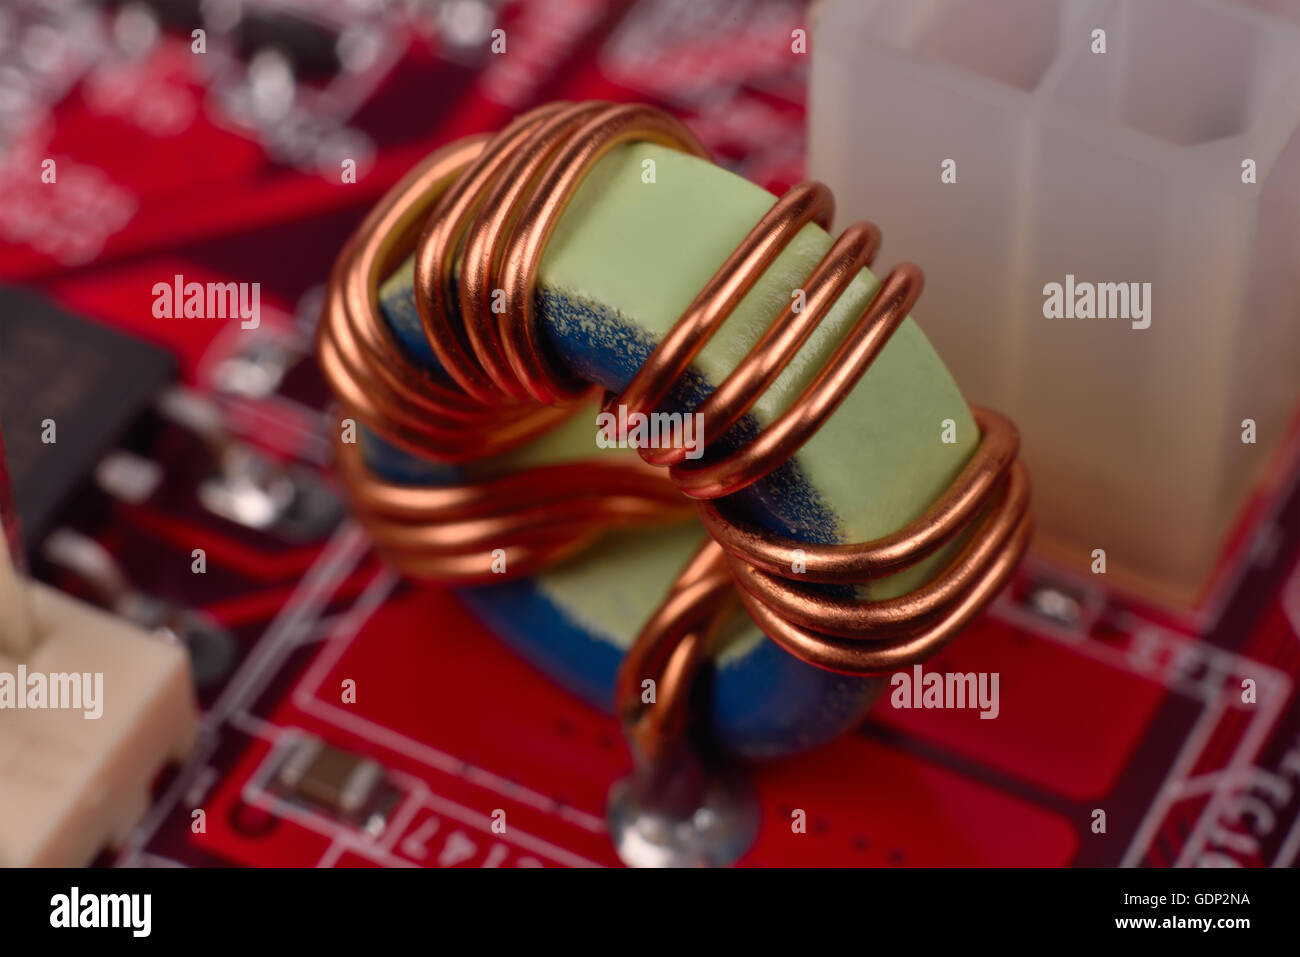 ferrite ring on red circuit board, close up Stock Photo